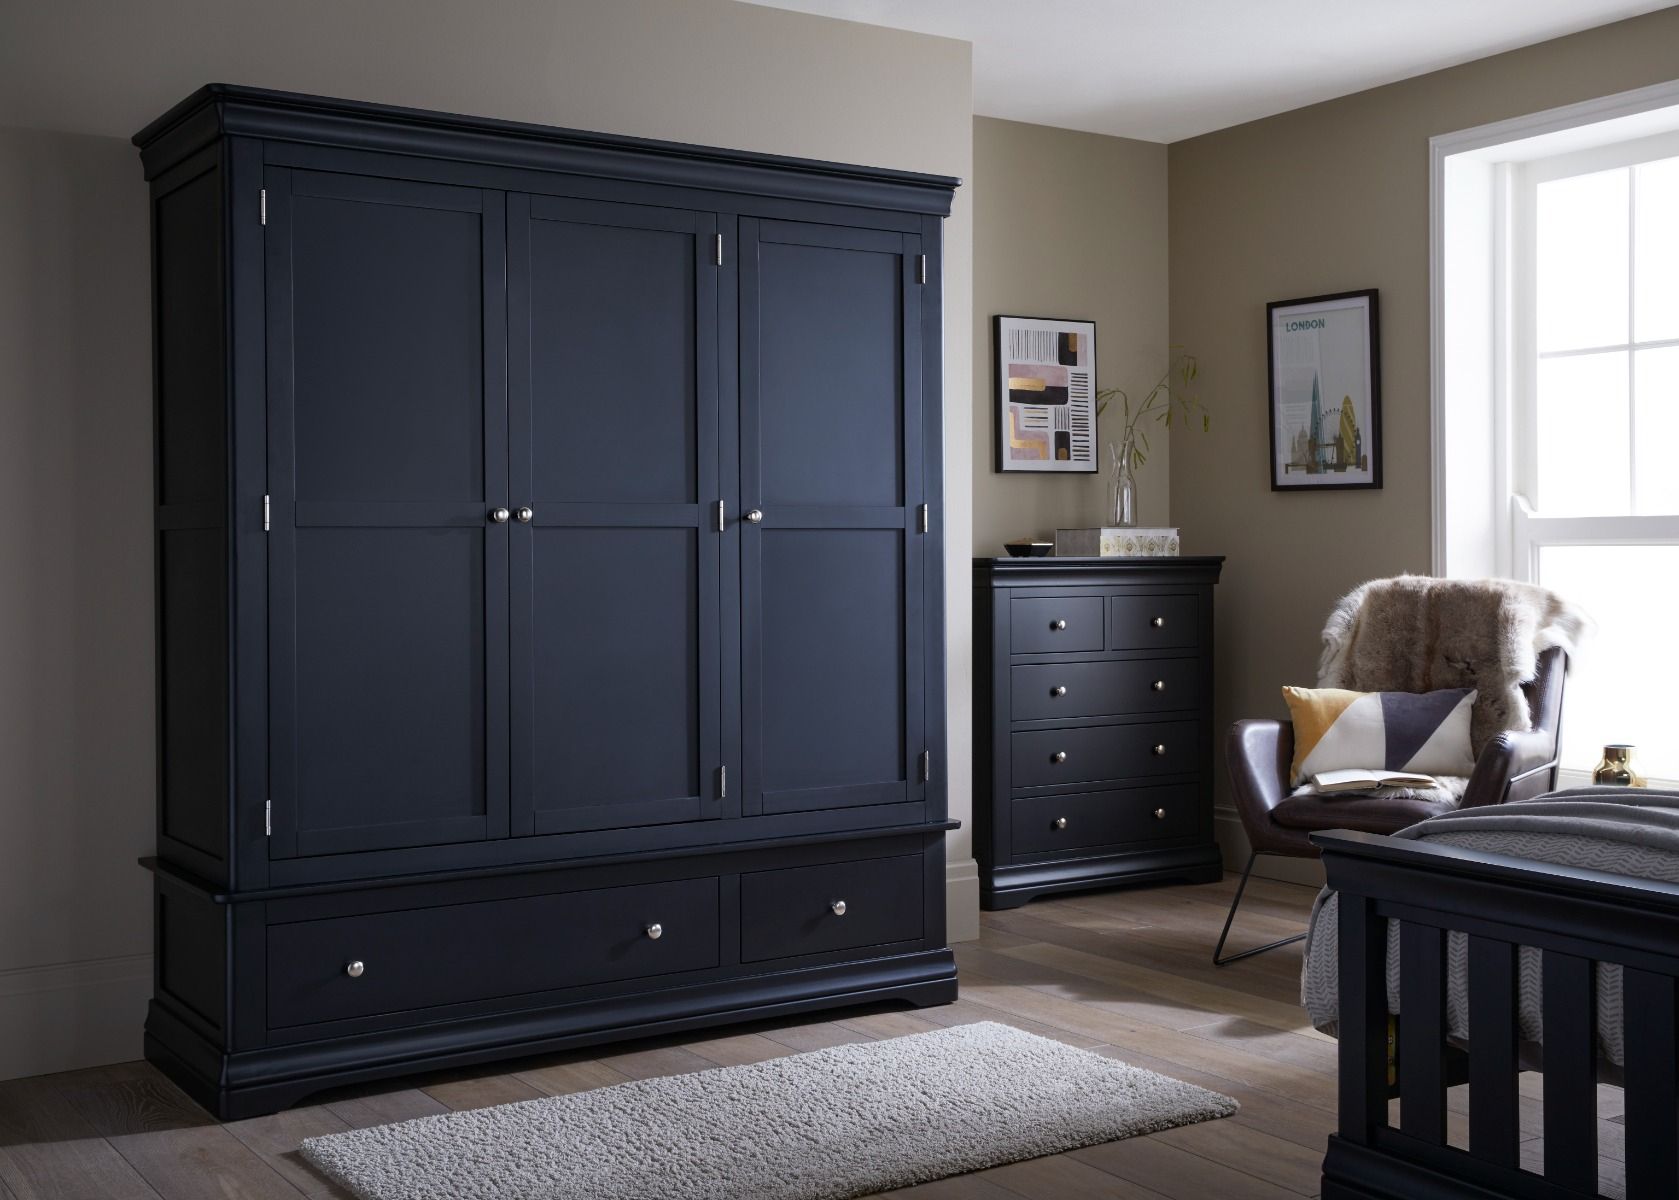 Toulouse Black Painted Large Triple Wardrobe With Drawer Regarding Wardrobes And Chest Of Drawers Combined (View 9 of 15)